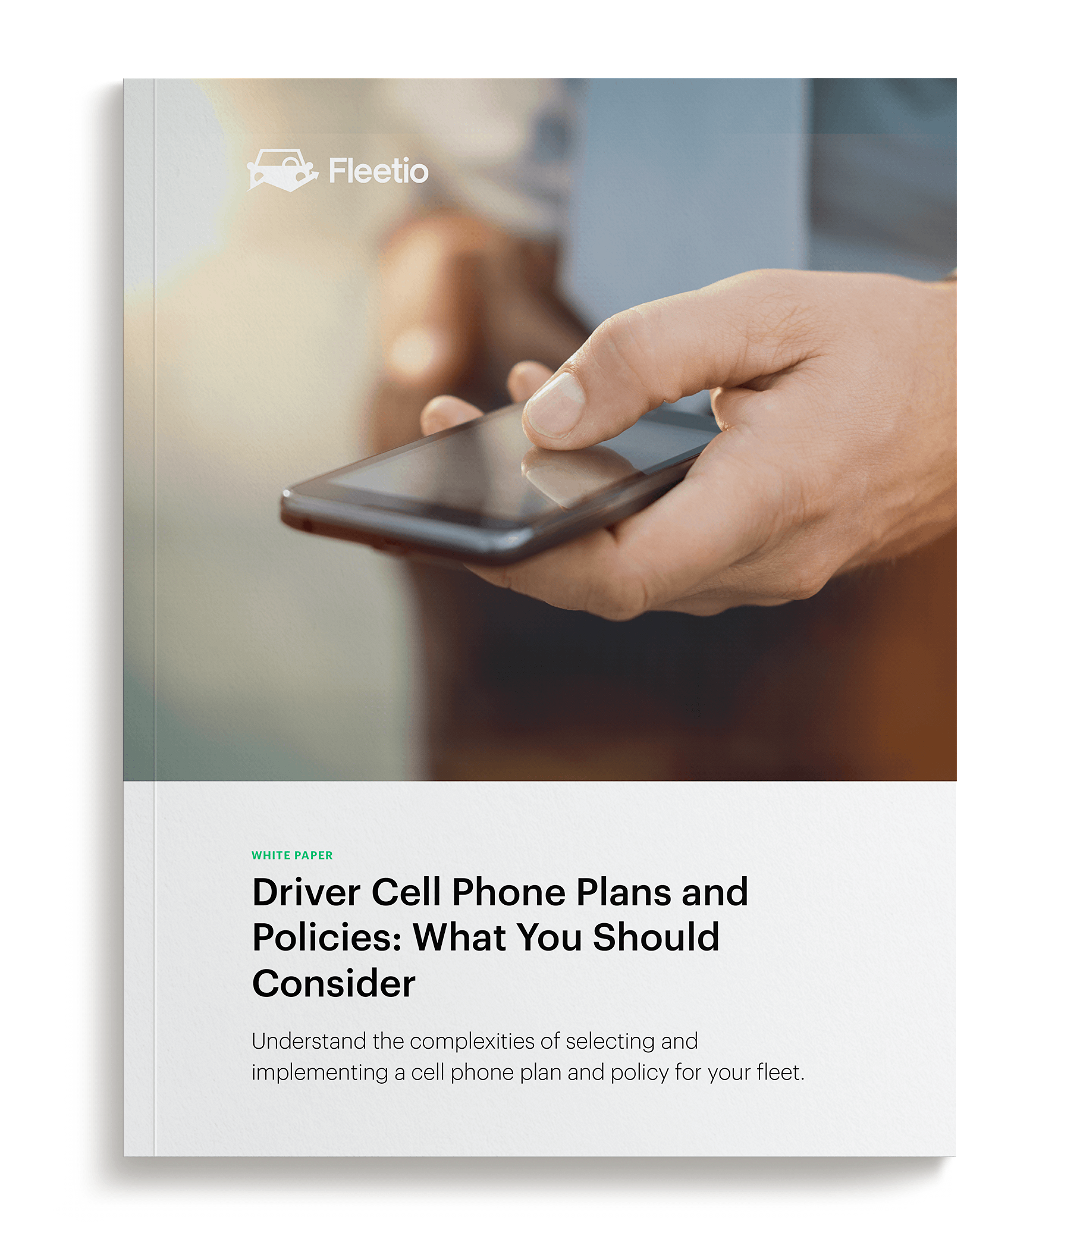 Driver Cell Phone Plans and Policies: What You Should Consider